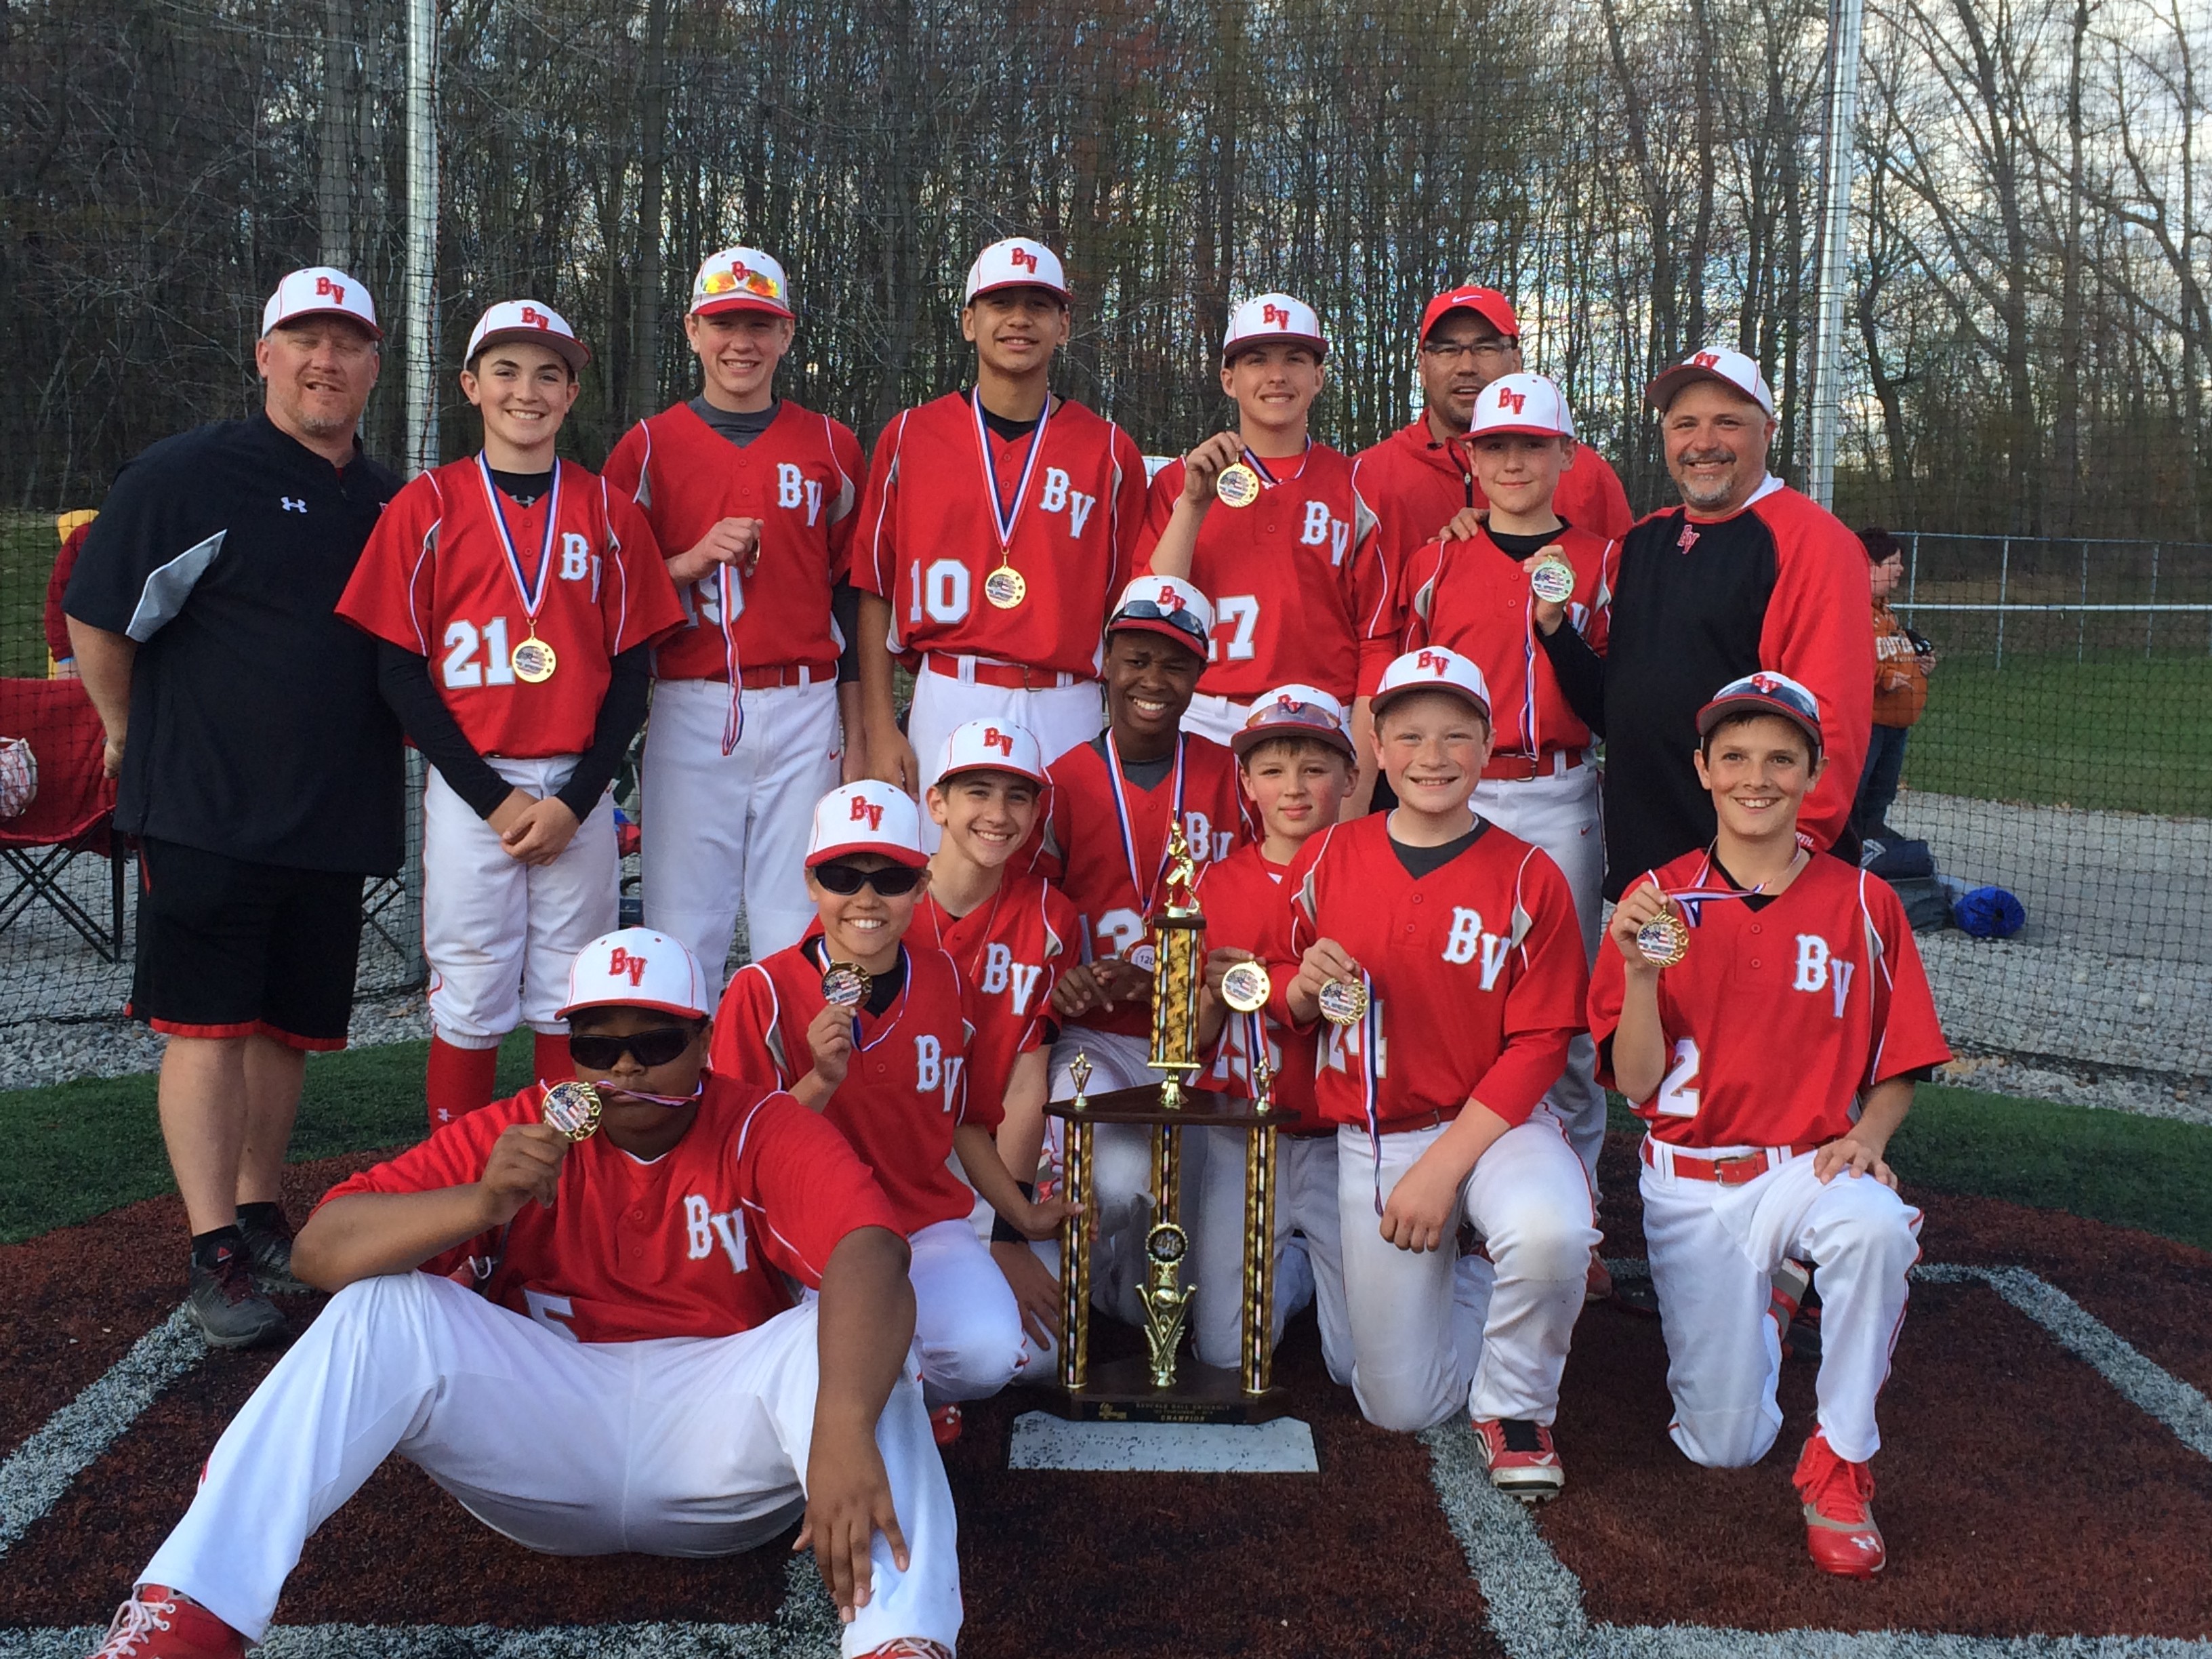 Champions and Runner up finishes – Beaver Valley Baseball